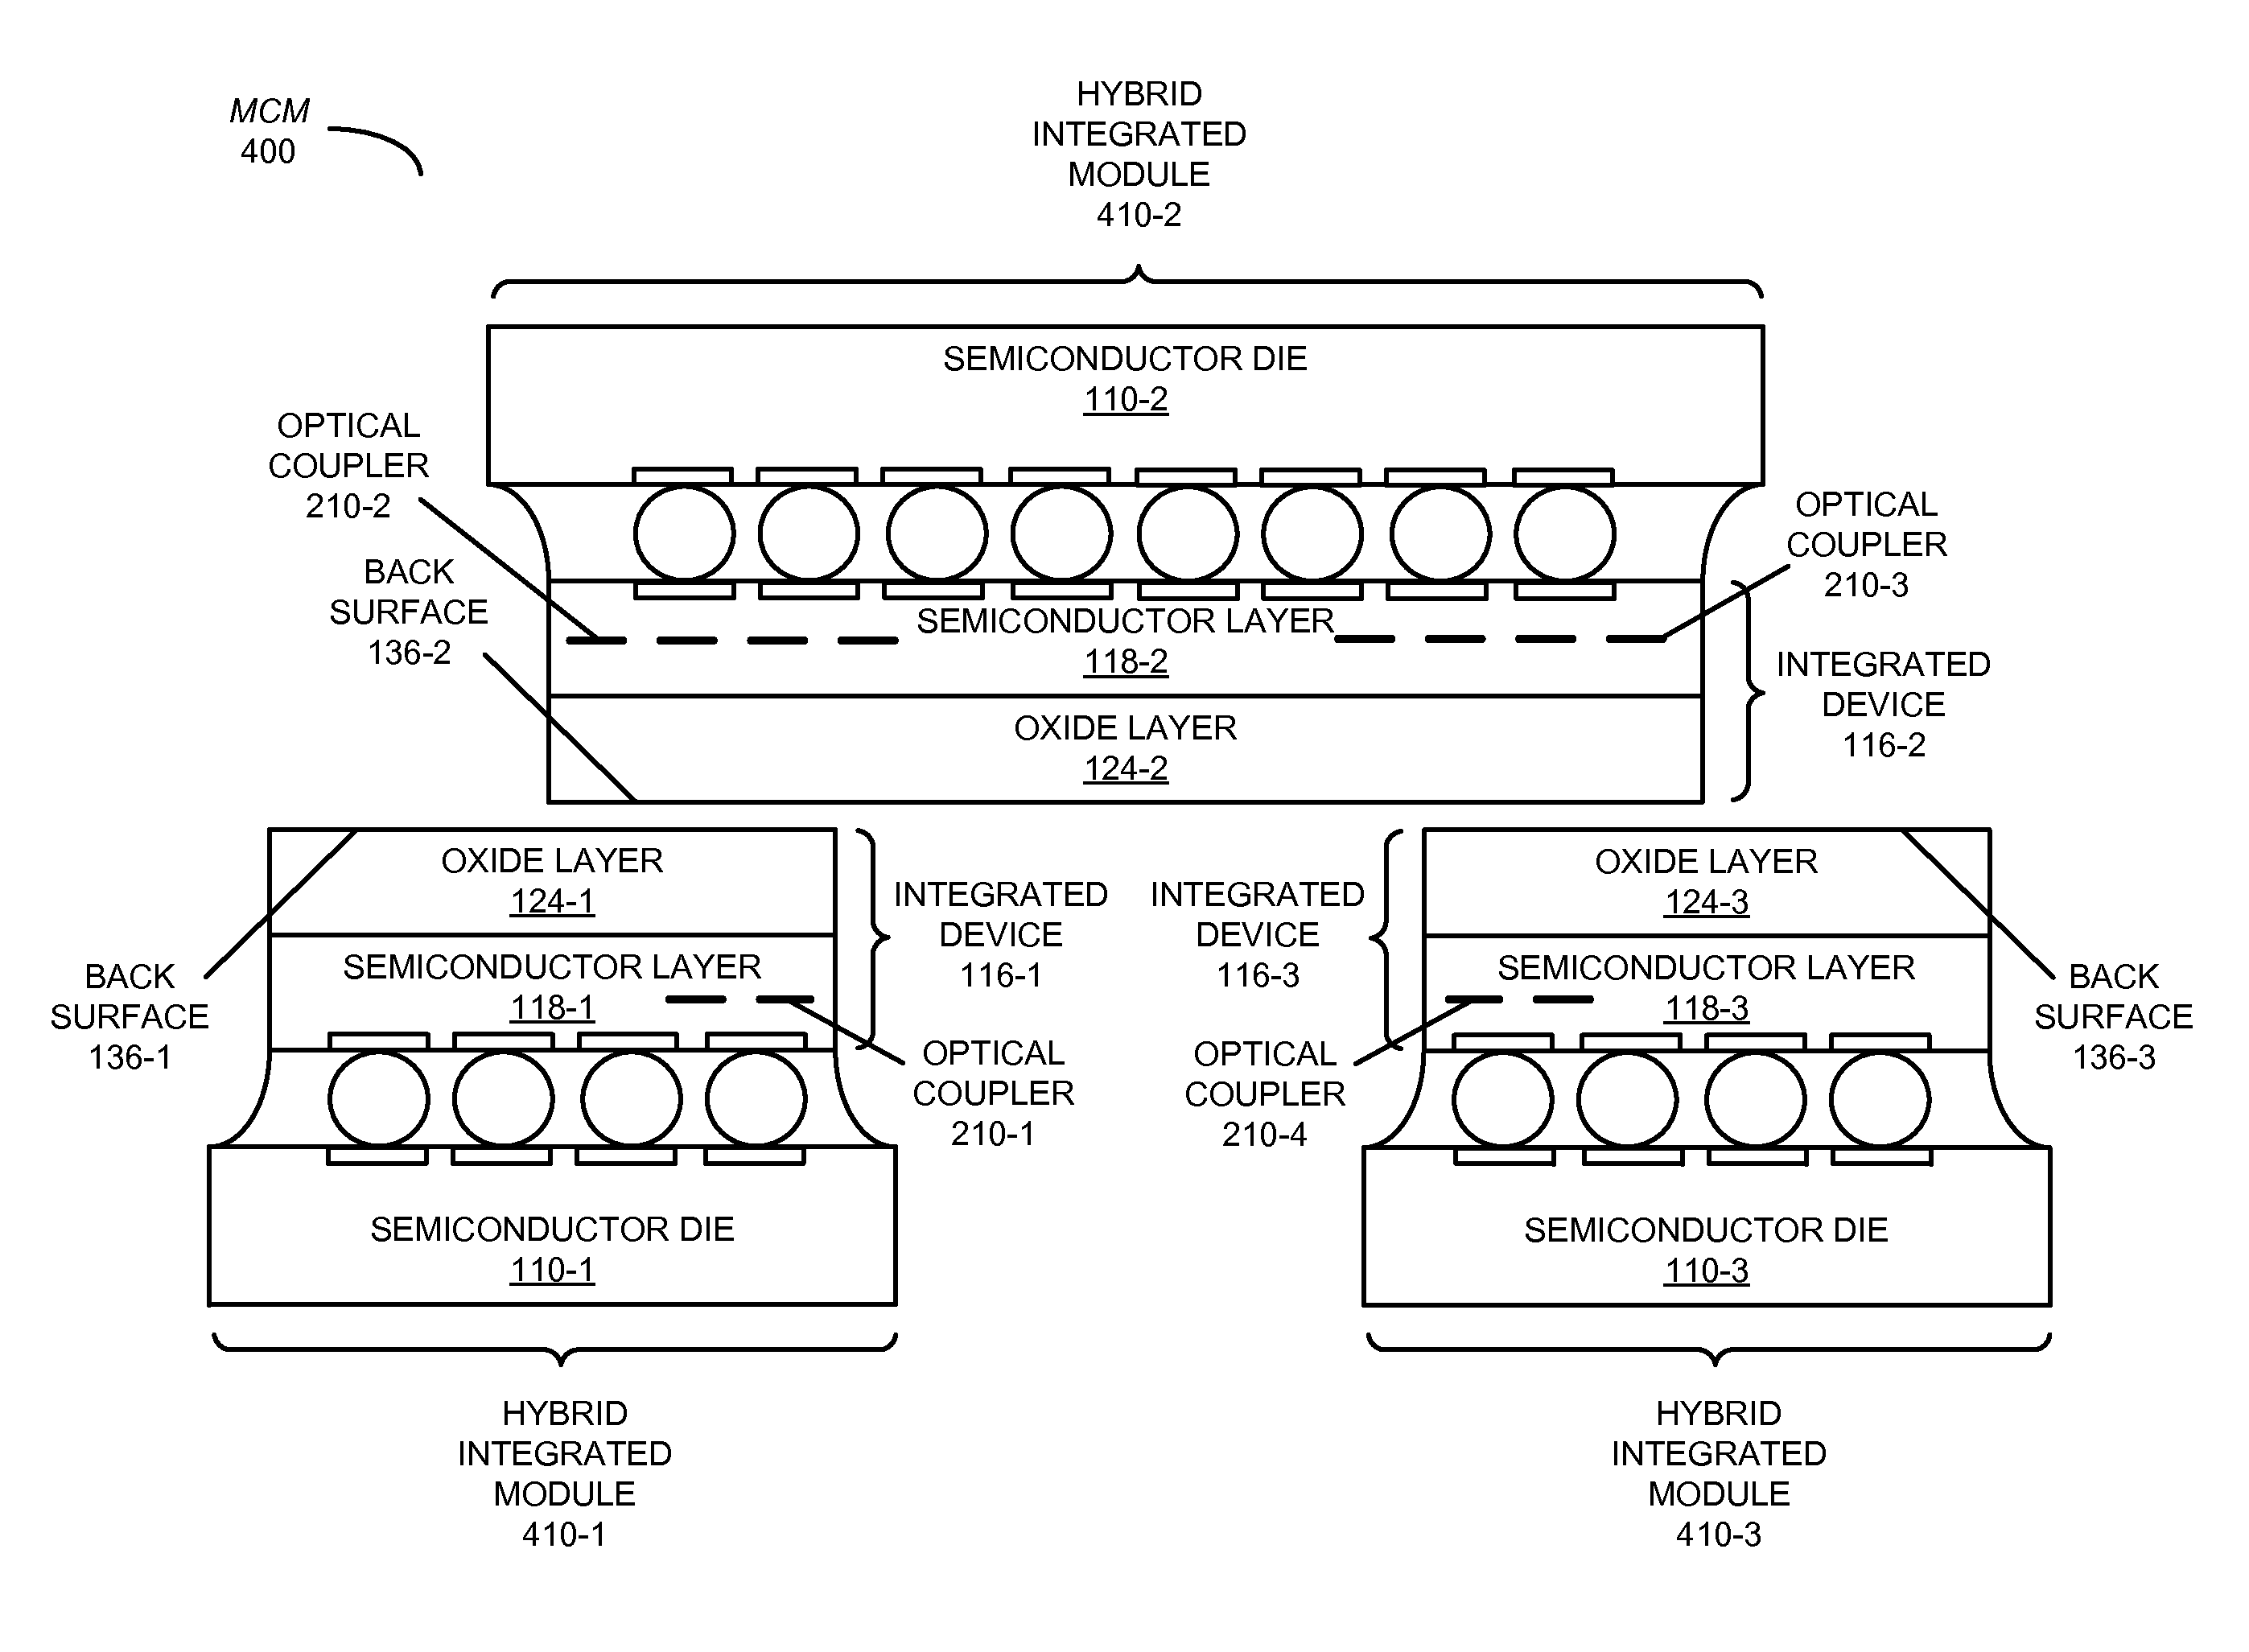 Hybrid substrateless device with enhanced tuning efficiency